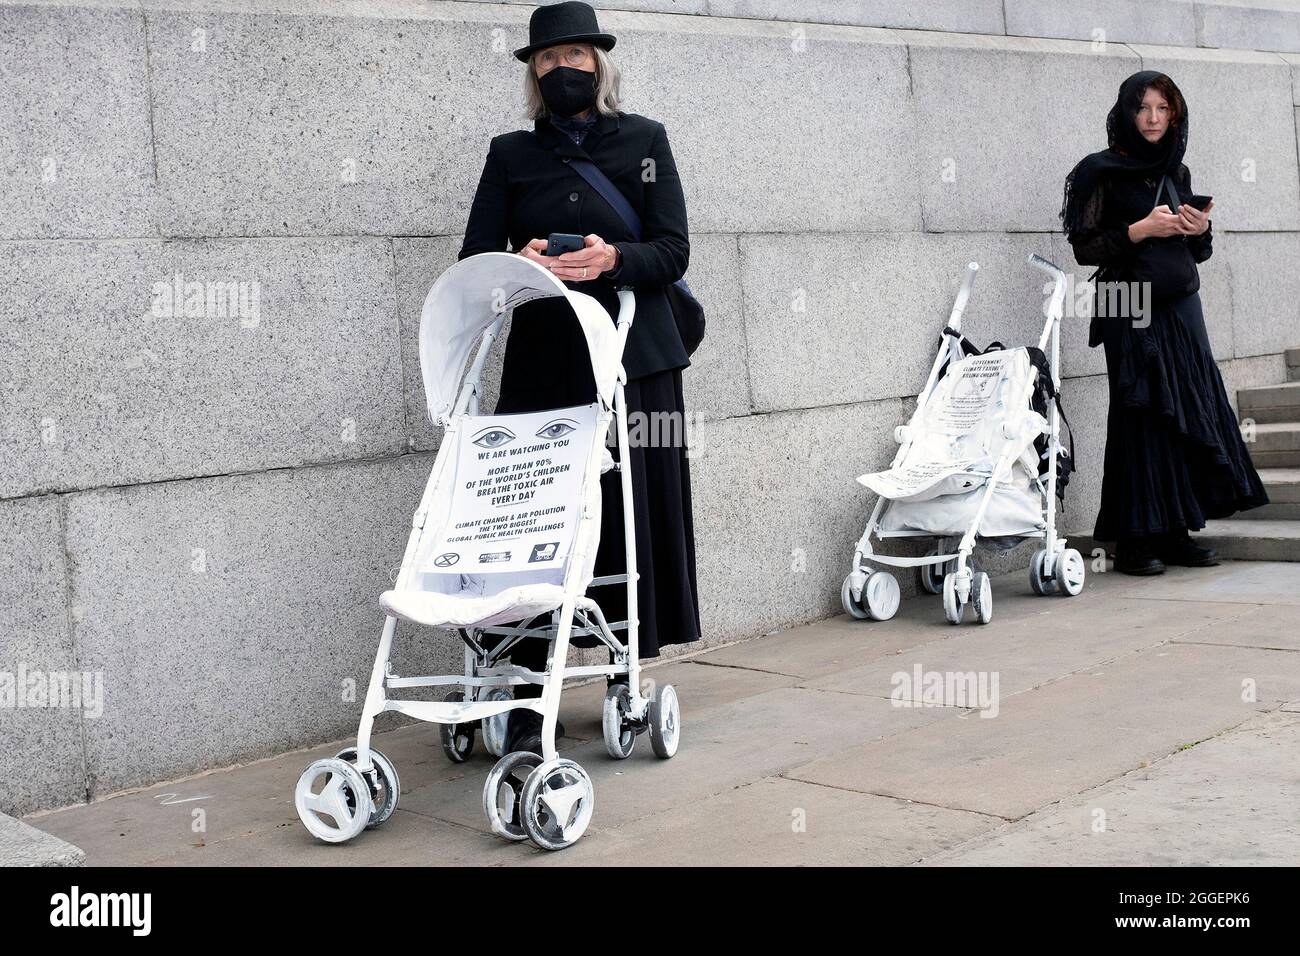 Protestors dressed for a funeral stop to look at their phones as Extinction Rebellion protestors end their Pram Action march at Trafalgar Square. Protestors painted childrenÕs prams white and performed a slow, silent funeral from Parliament Square to Trafalgar Square on the ninth day of their Impossible Rebellion in London, United Kingdom on August 31, 2021. Kieran Riley/Pathos Stock Photo